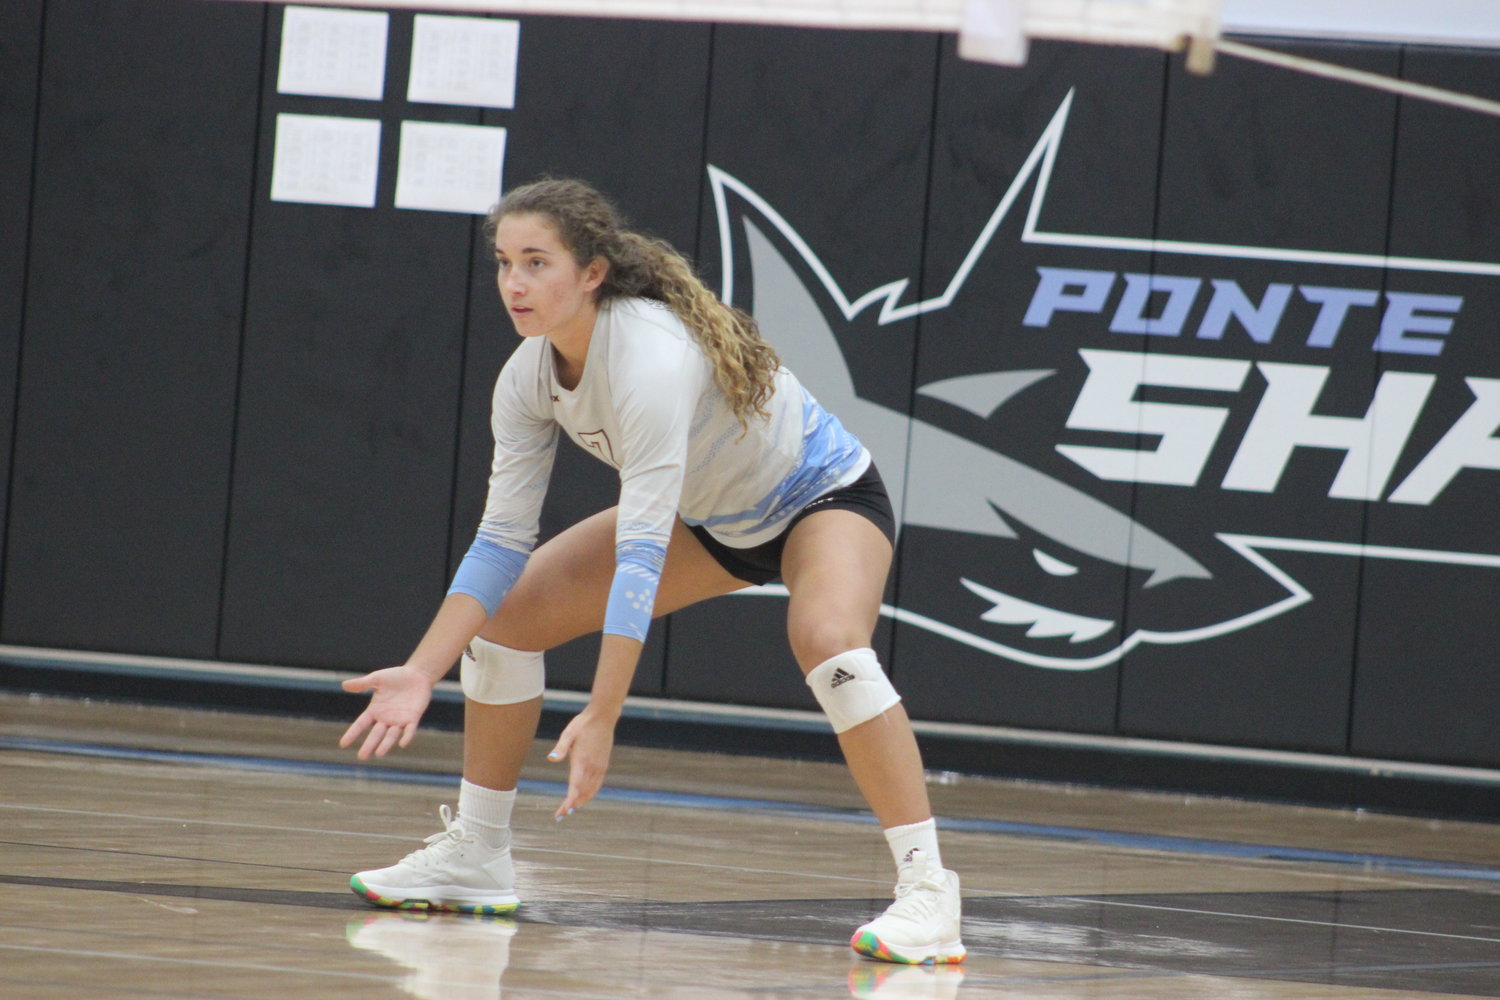 Senior volleyball player Kendall Mignerey was named the Ponte Vedra High November student-athlete of the month.